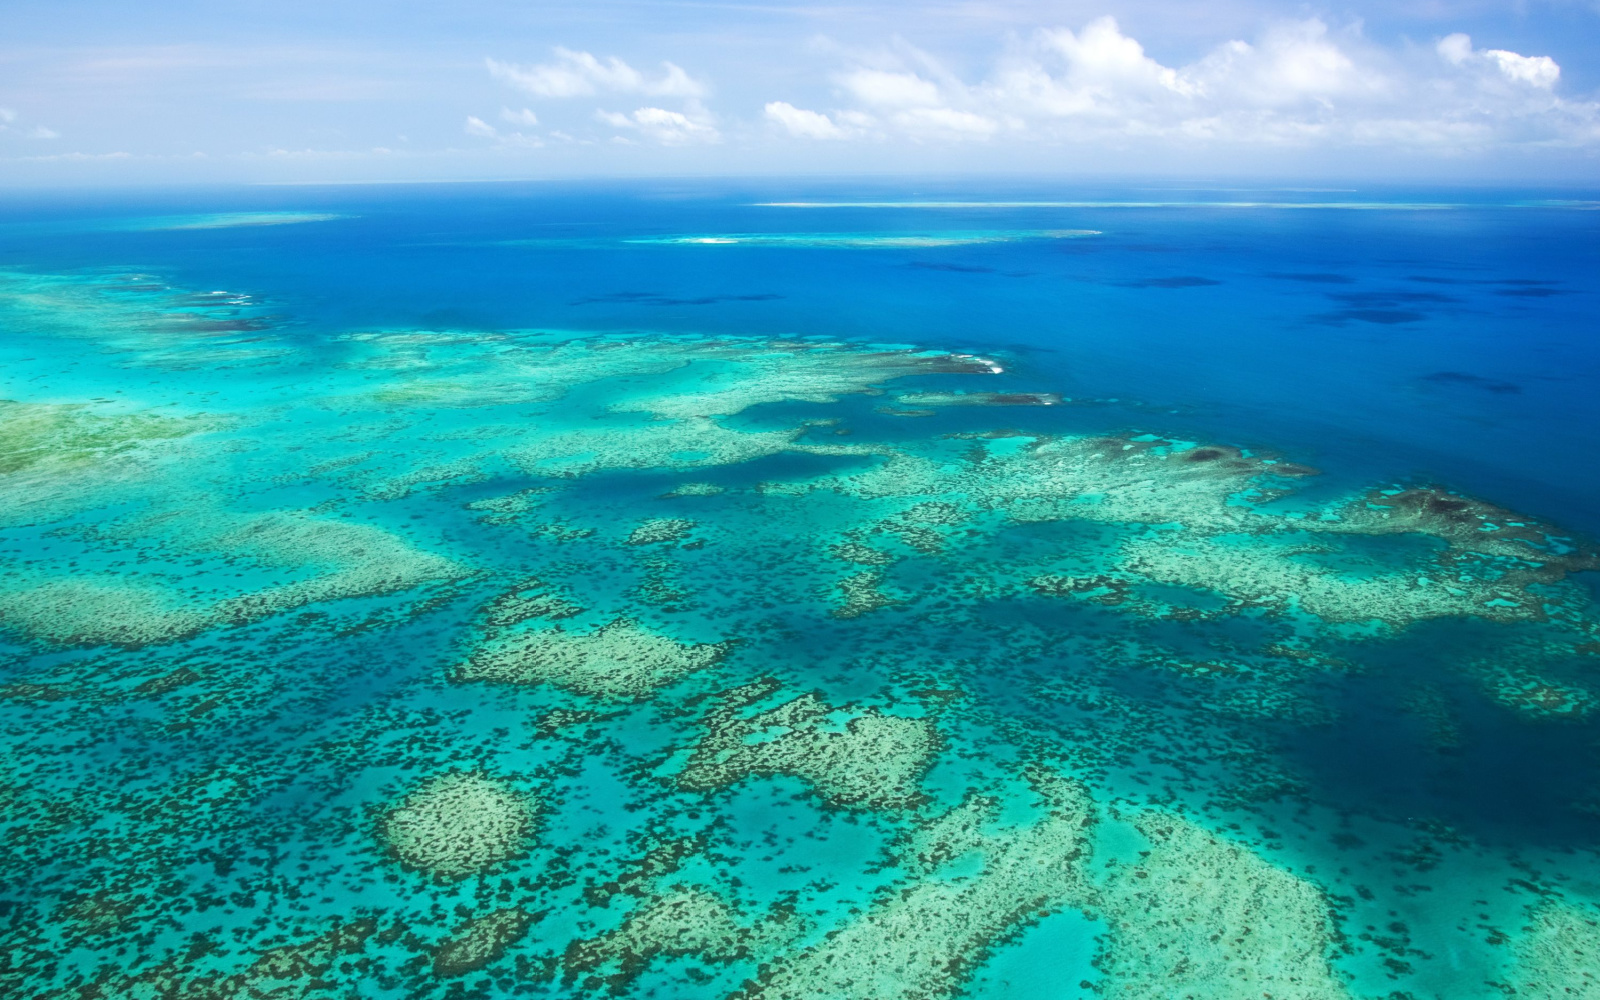 The Best Time to Visit the Great Barrier Reef